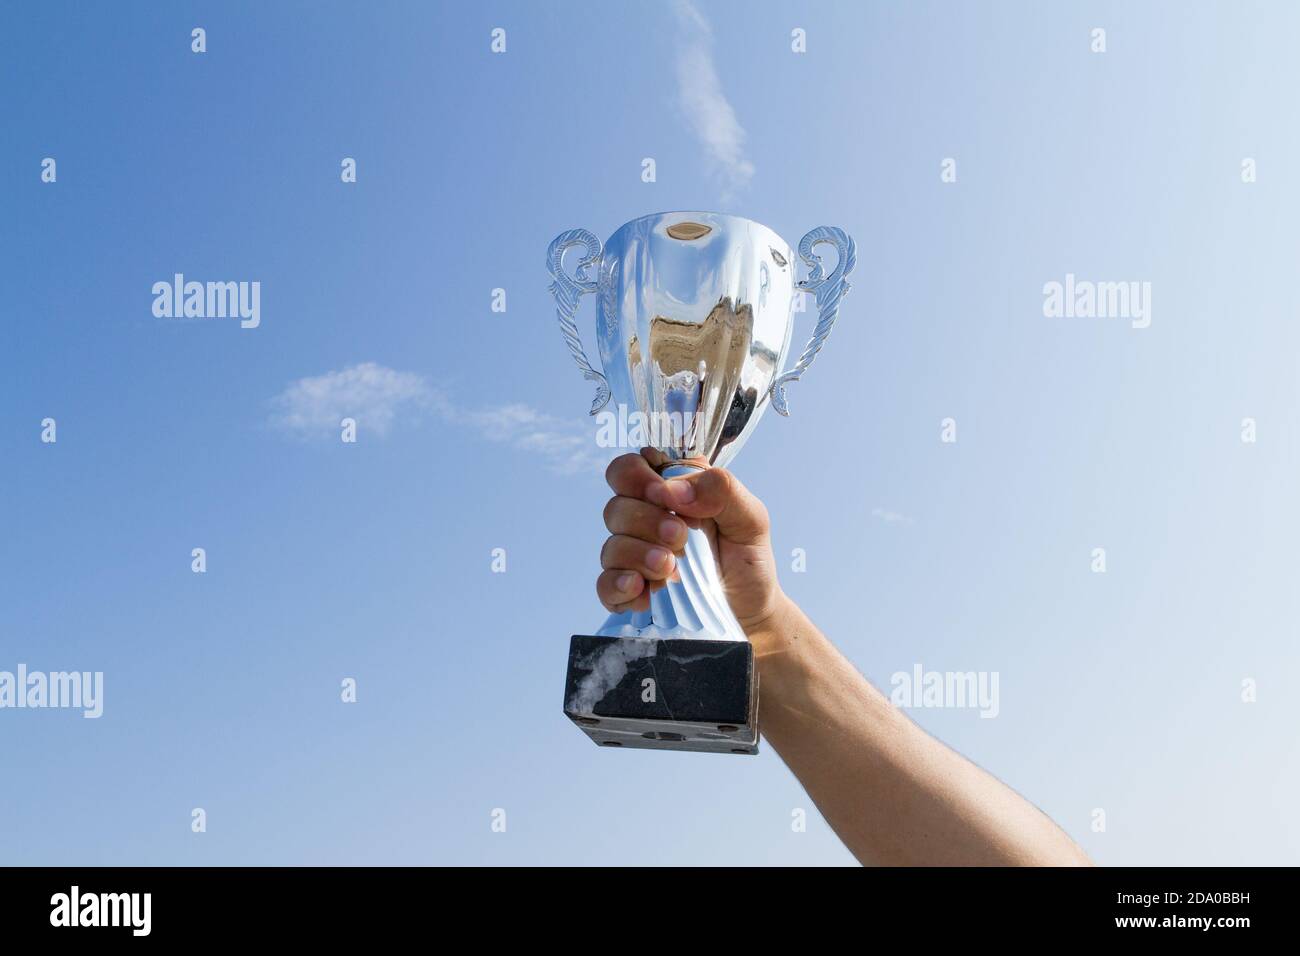 Male athlete holding up a trophy cup. Competition winner athlete displaying champion trophy cup on blue sky background. Sports, achievement, success c Stock Photo